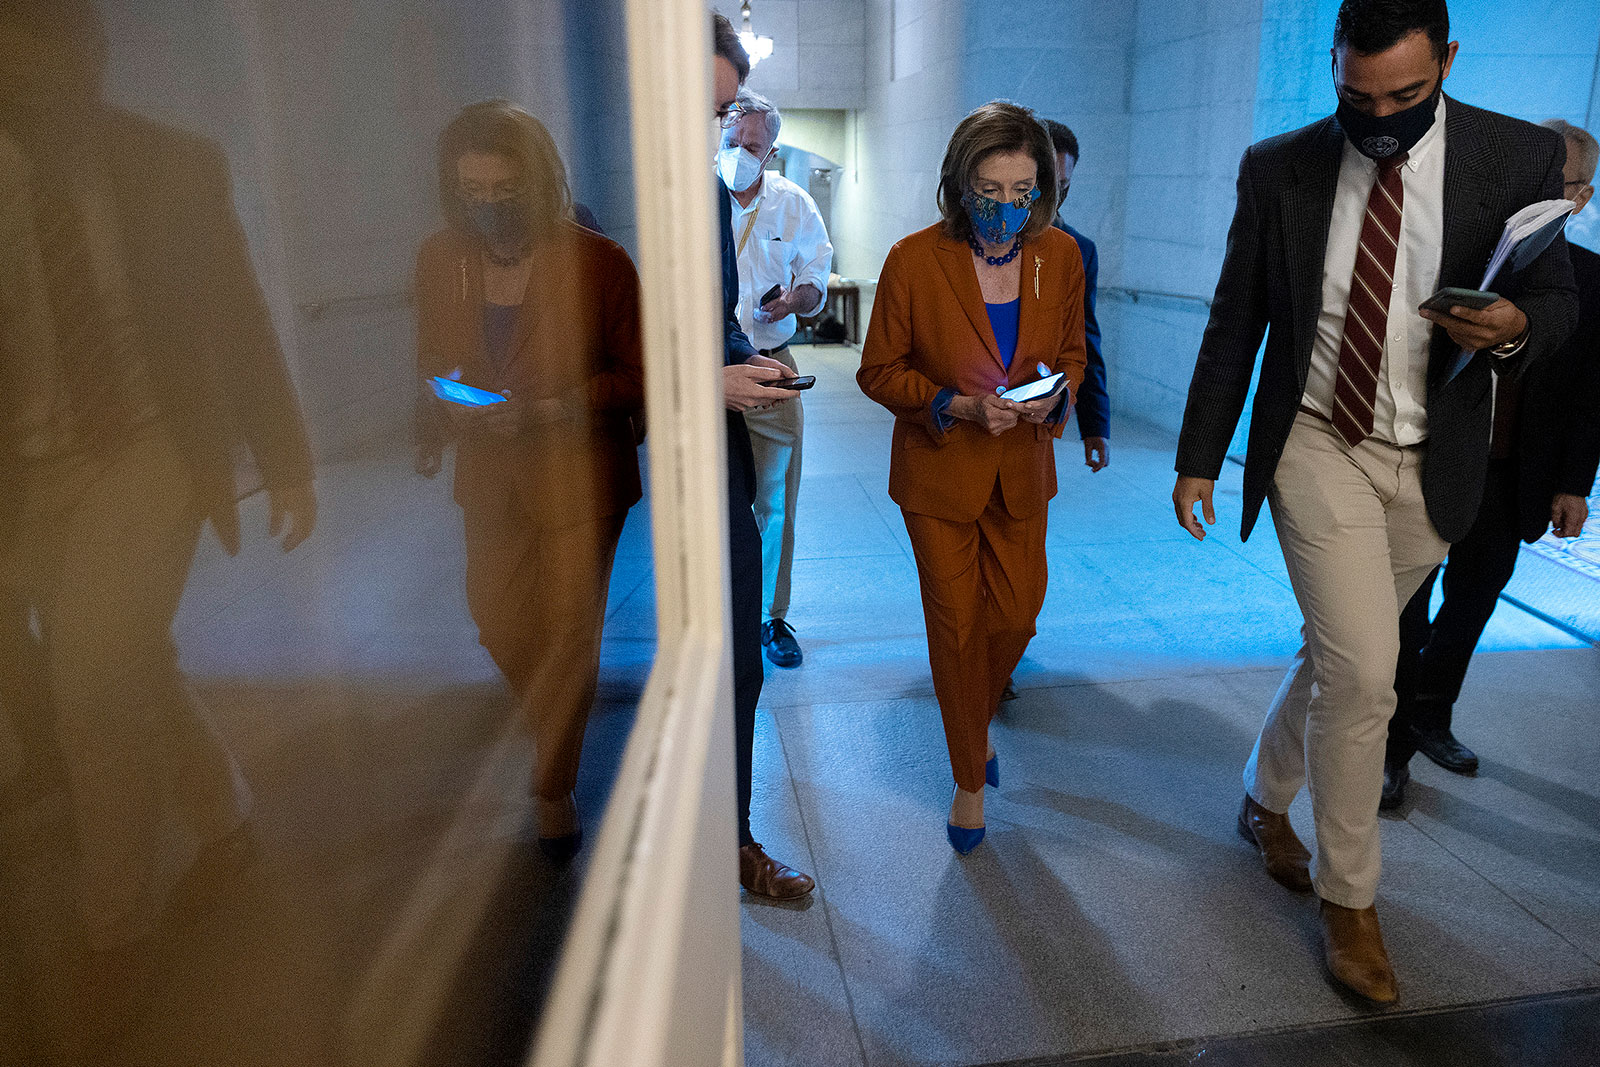 House Speaker Nancy Pelosi departs a Democratic whip meeting at the US Capitol on Wednesday.